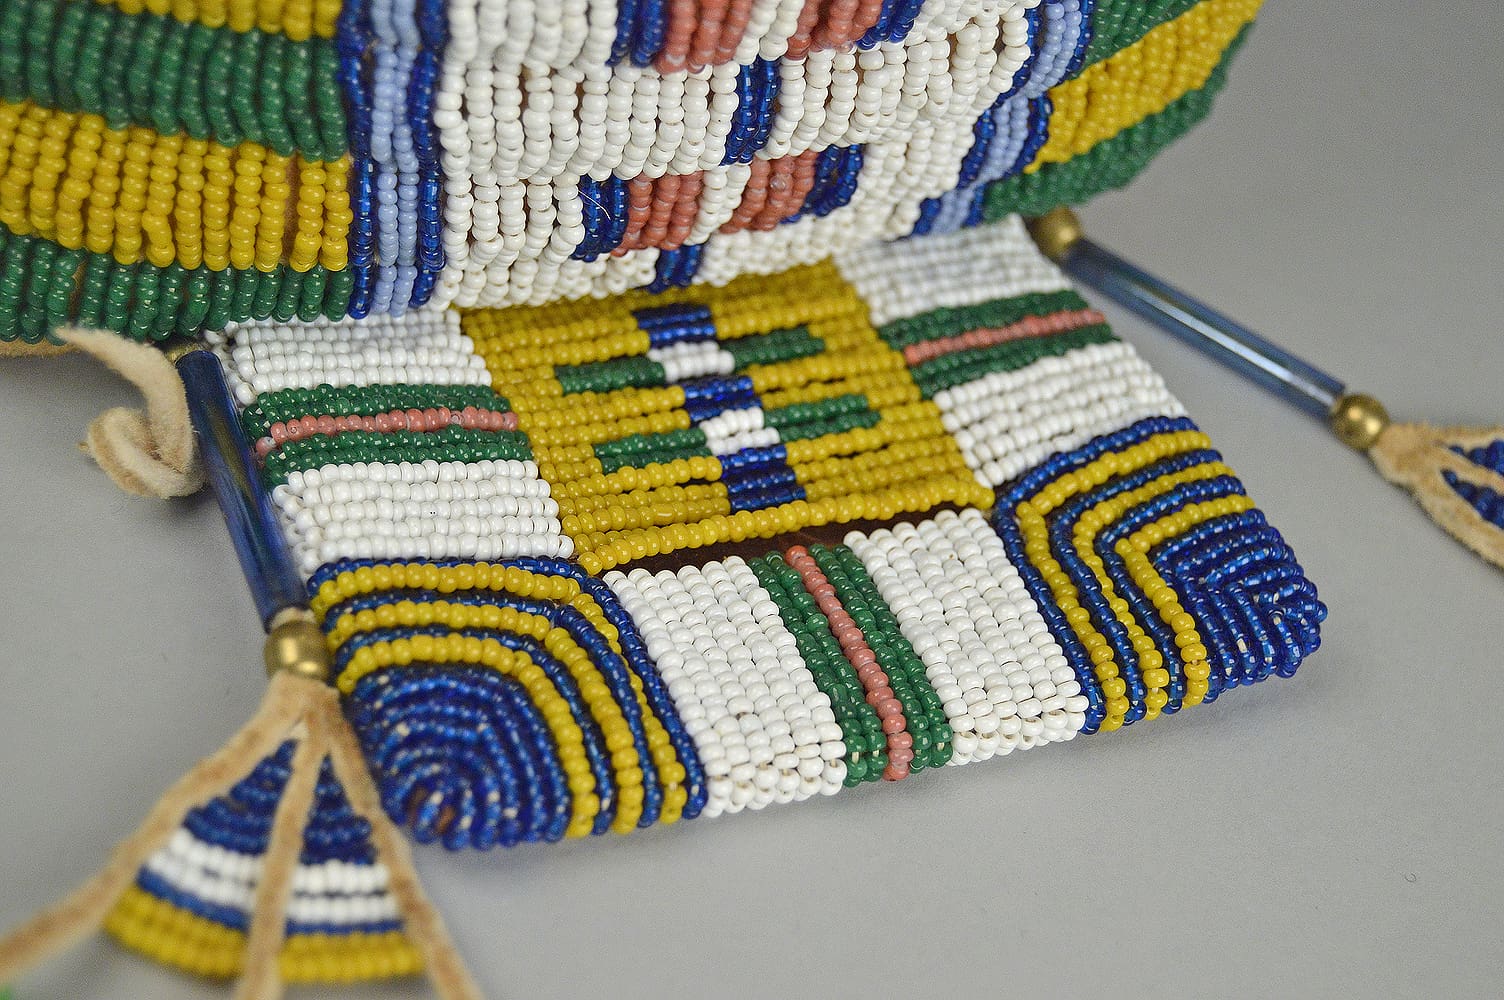 Southern Cheyenne Beaded Cradle Reproduction